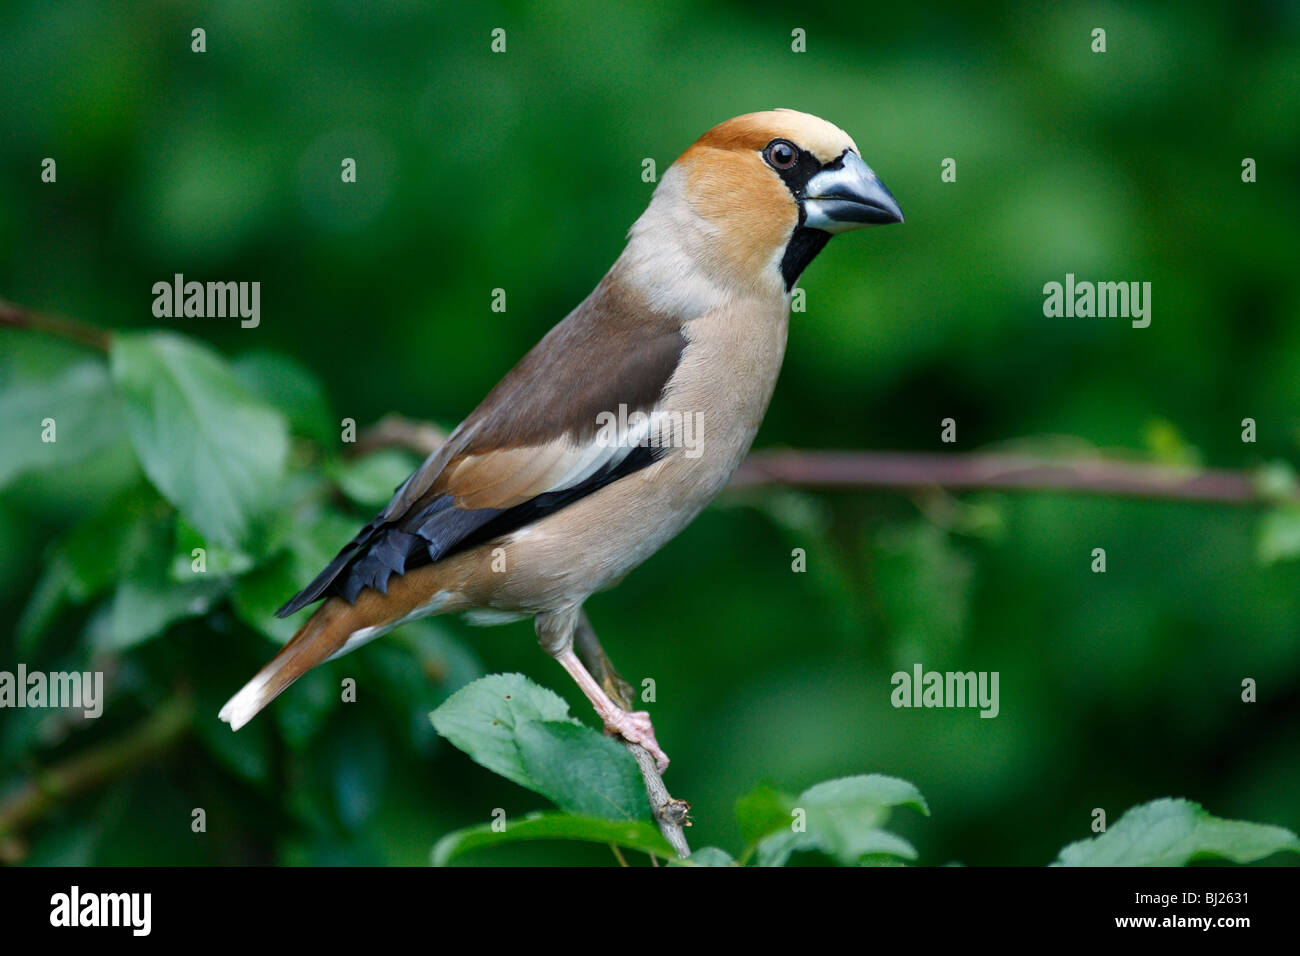 Hawfinch (Coccothraustes coccothraustes) male perched on branch in garden, Germany Stock Photo